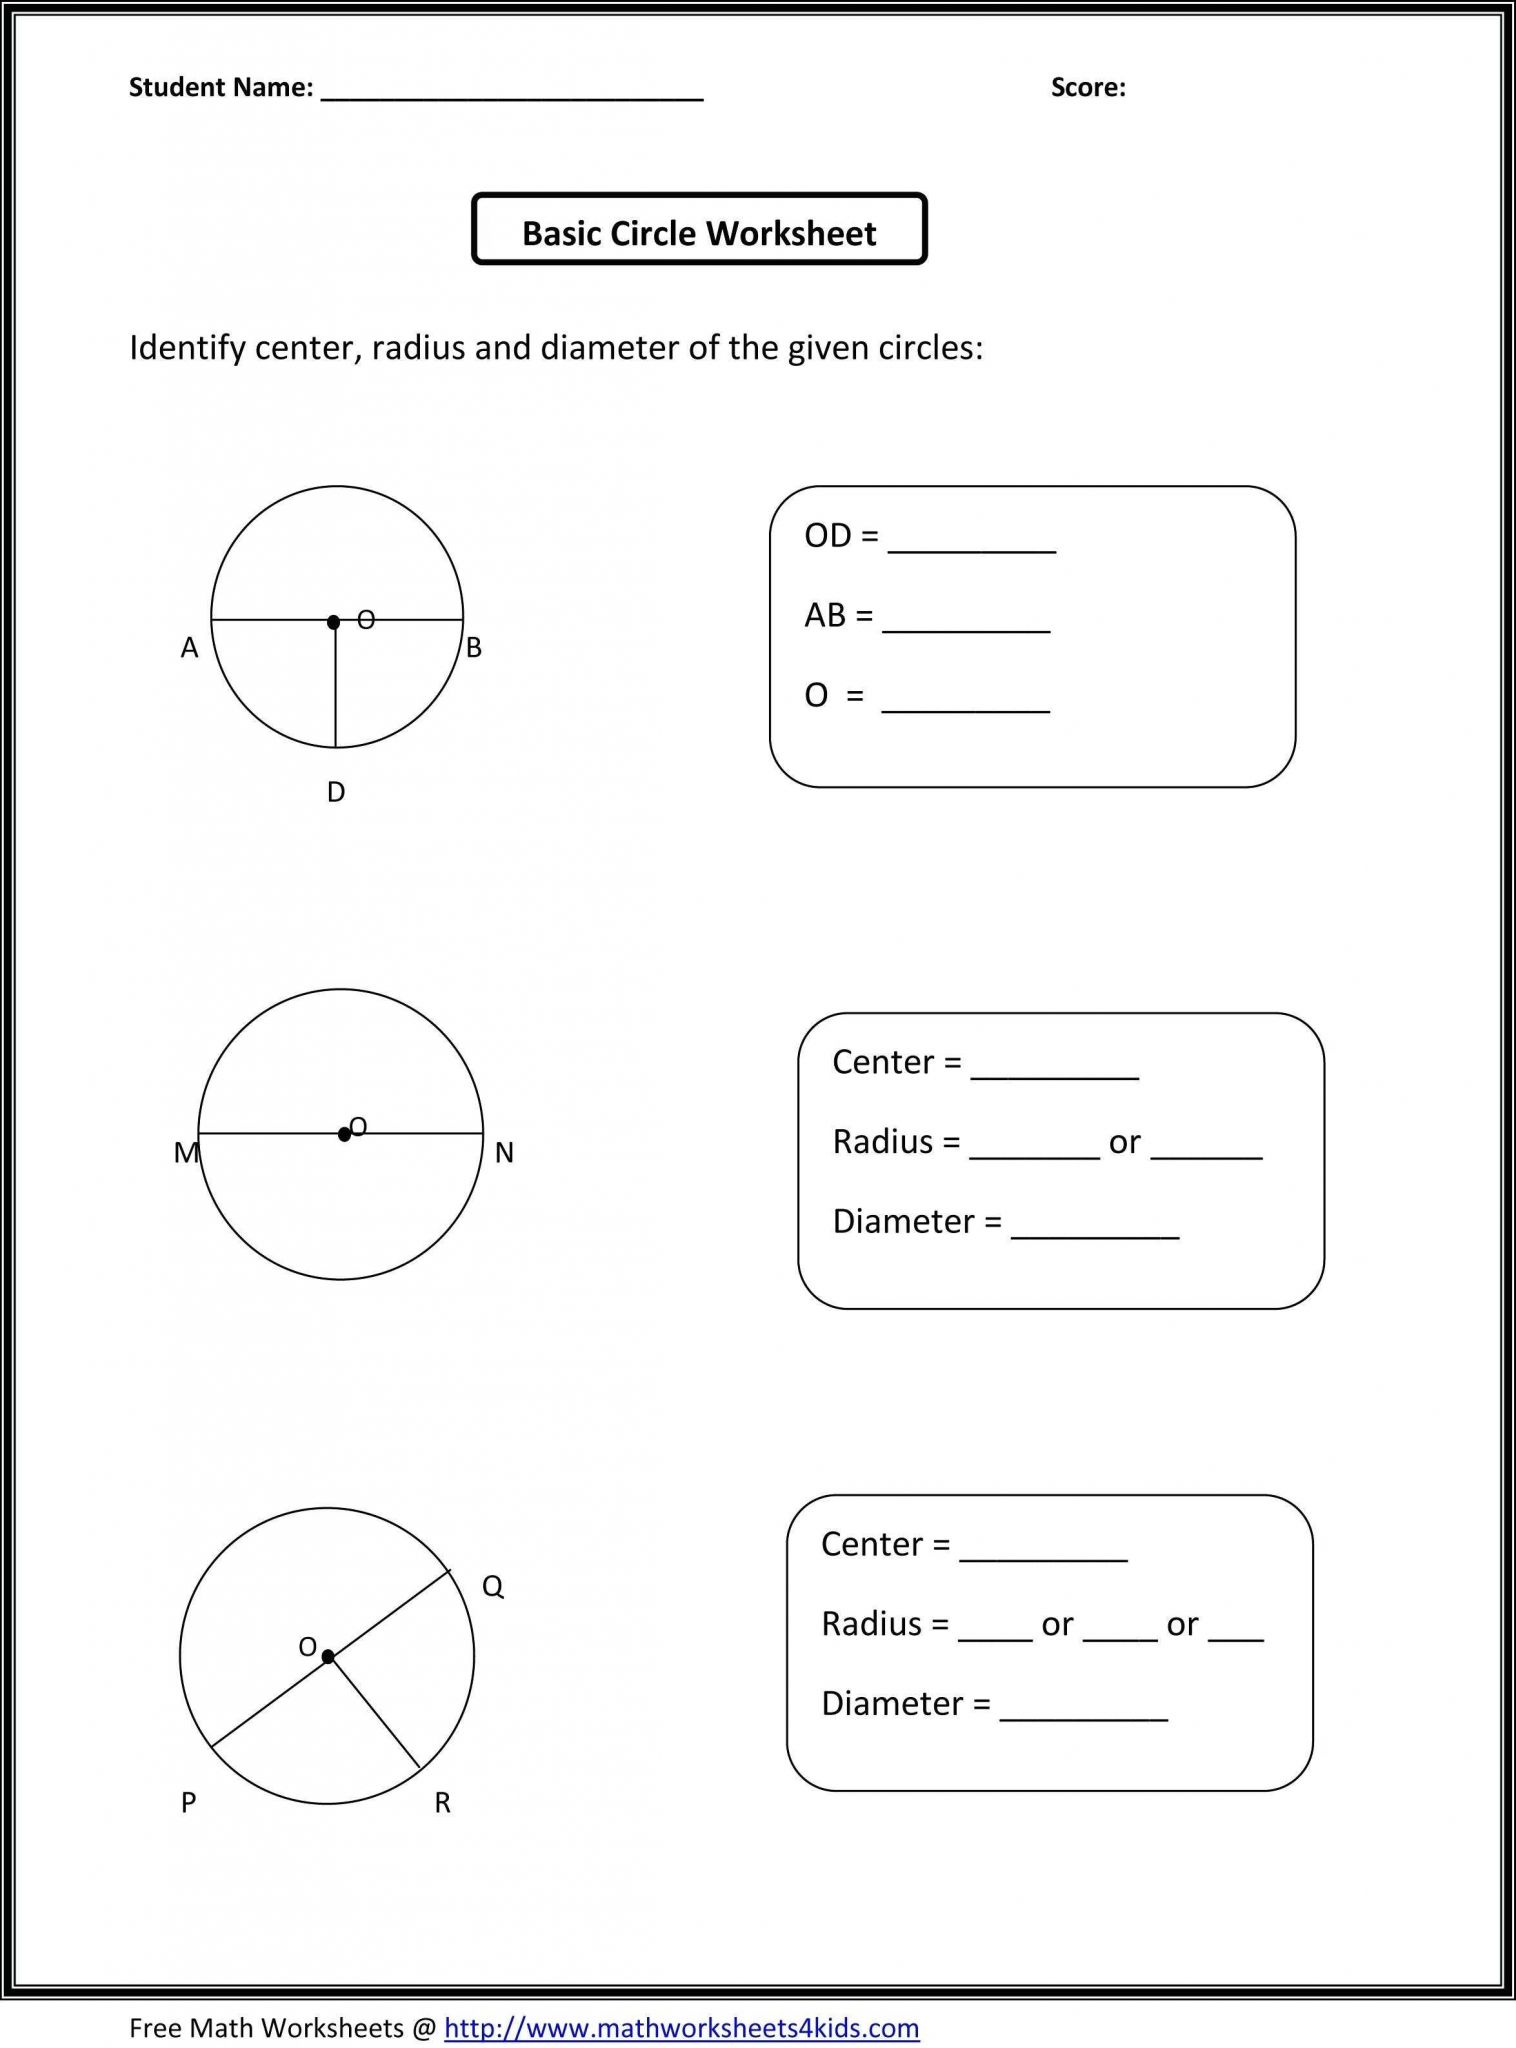 Prefix and Suffix Worksheets Pdf and 34 Awesome Prefix and Suffix Worksheets Pdf